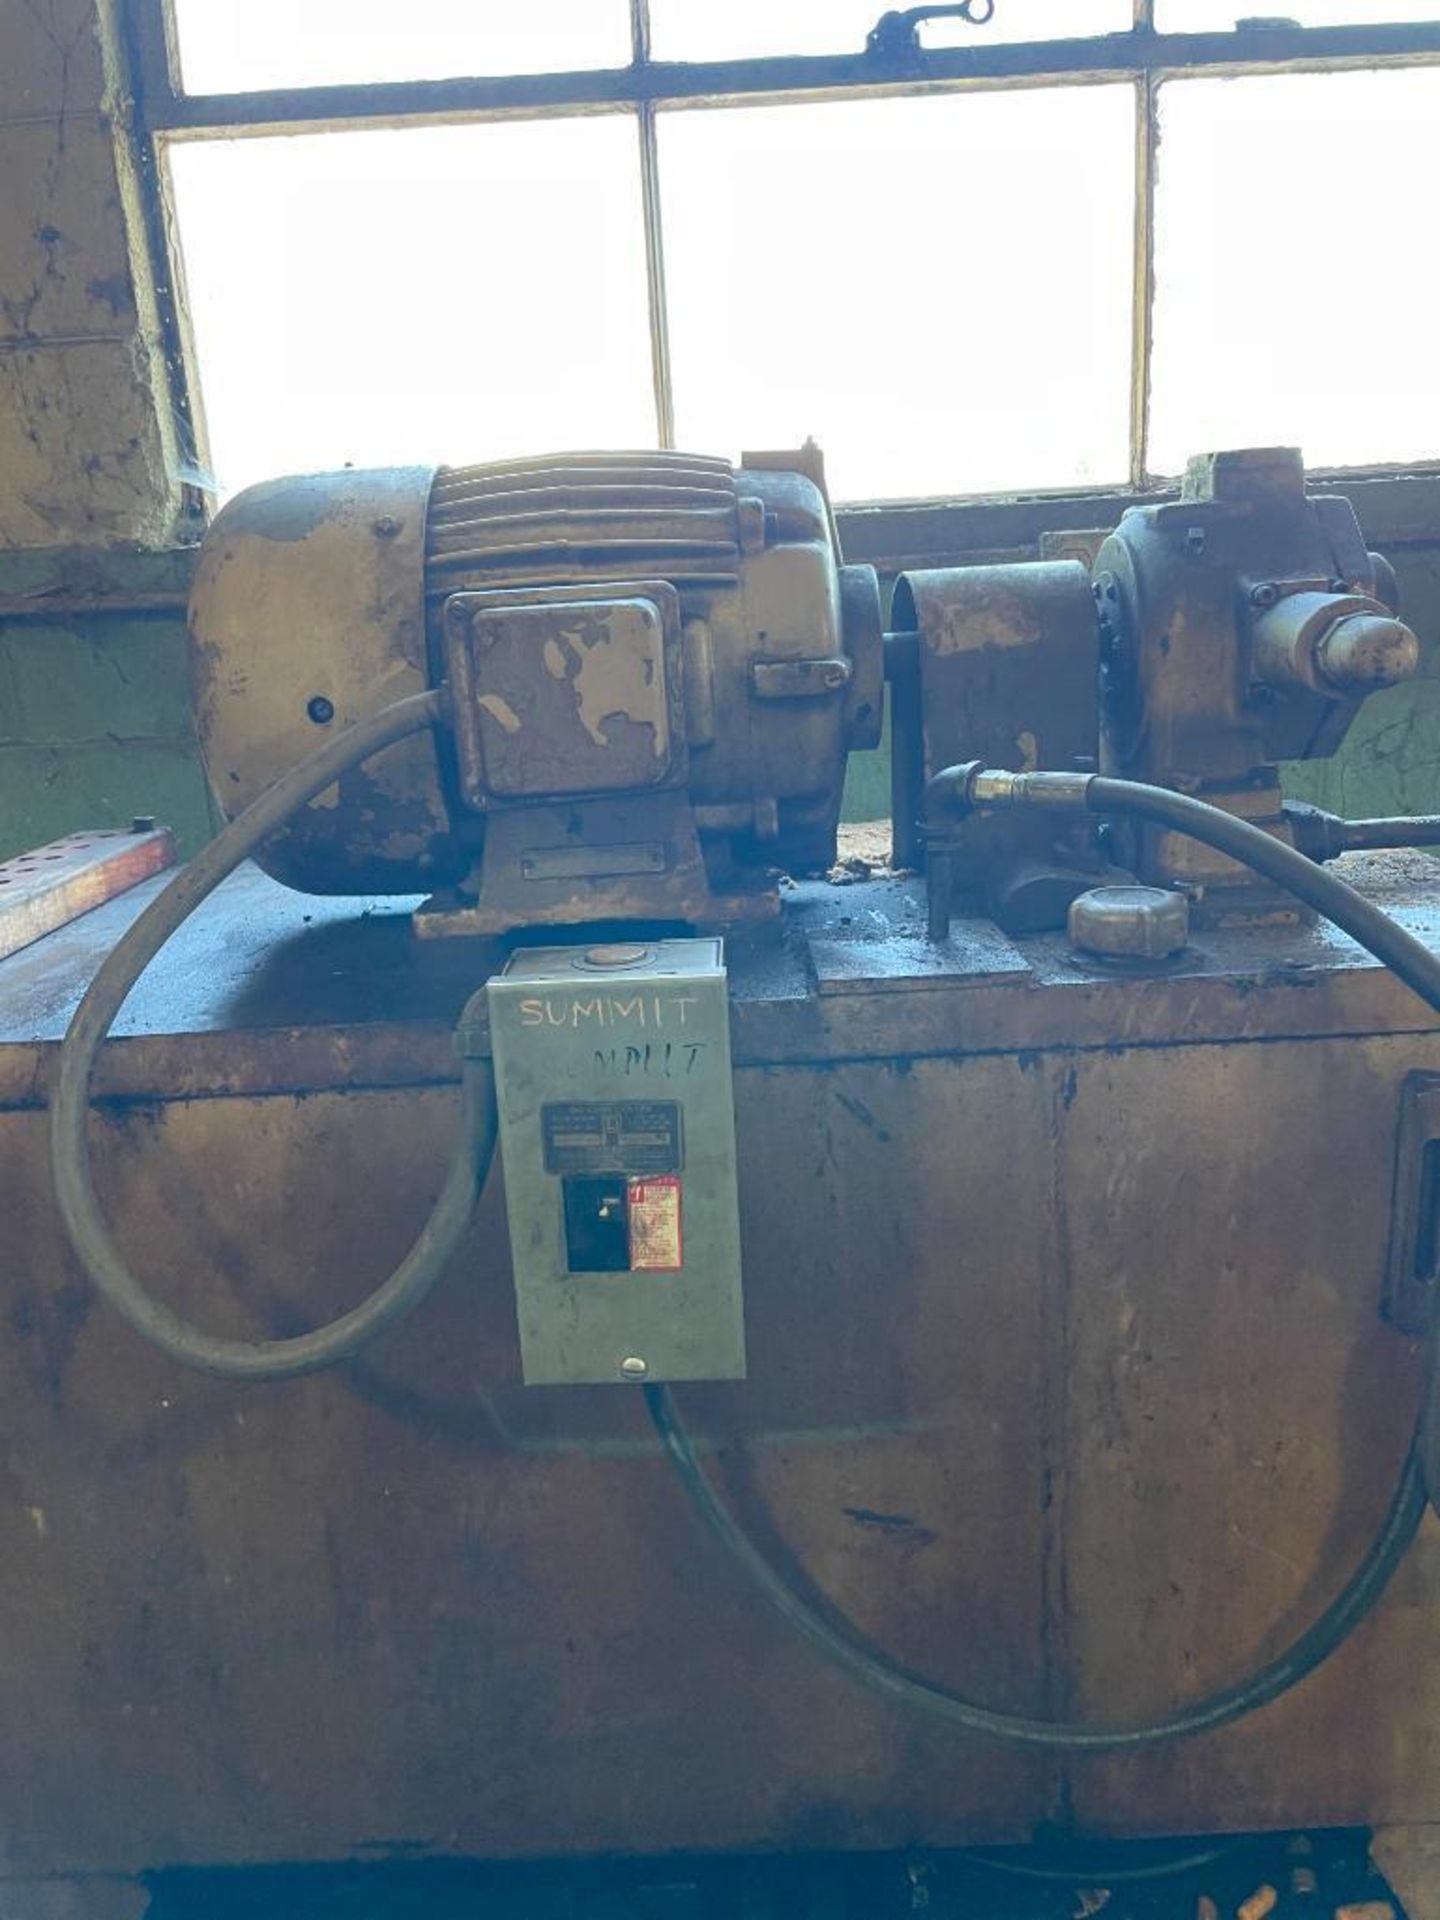 4 POST HYDRAULIC PRESS AND ACCESSORIES; $750 LOADING FEE - Image 6 of 7